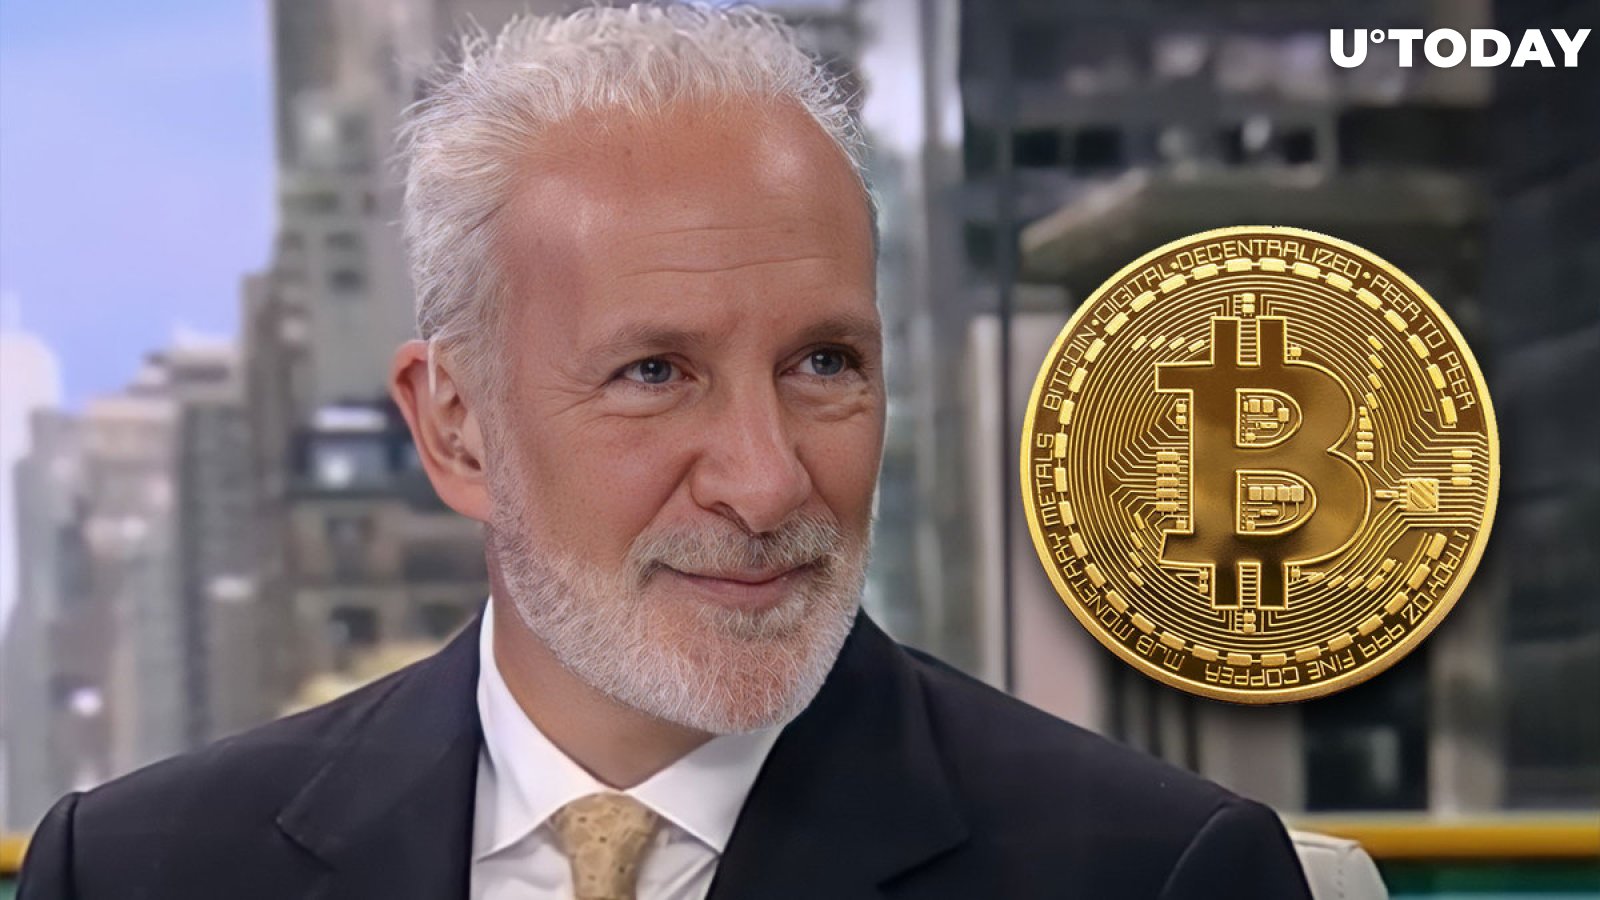 Bitcoin Critic Peter Schiff Explains Why BTC Just Rallied to $28,000